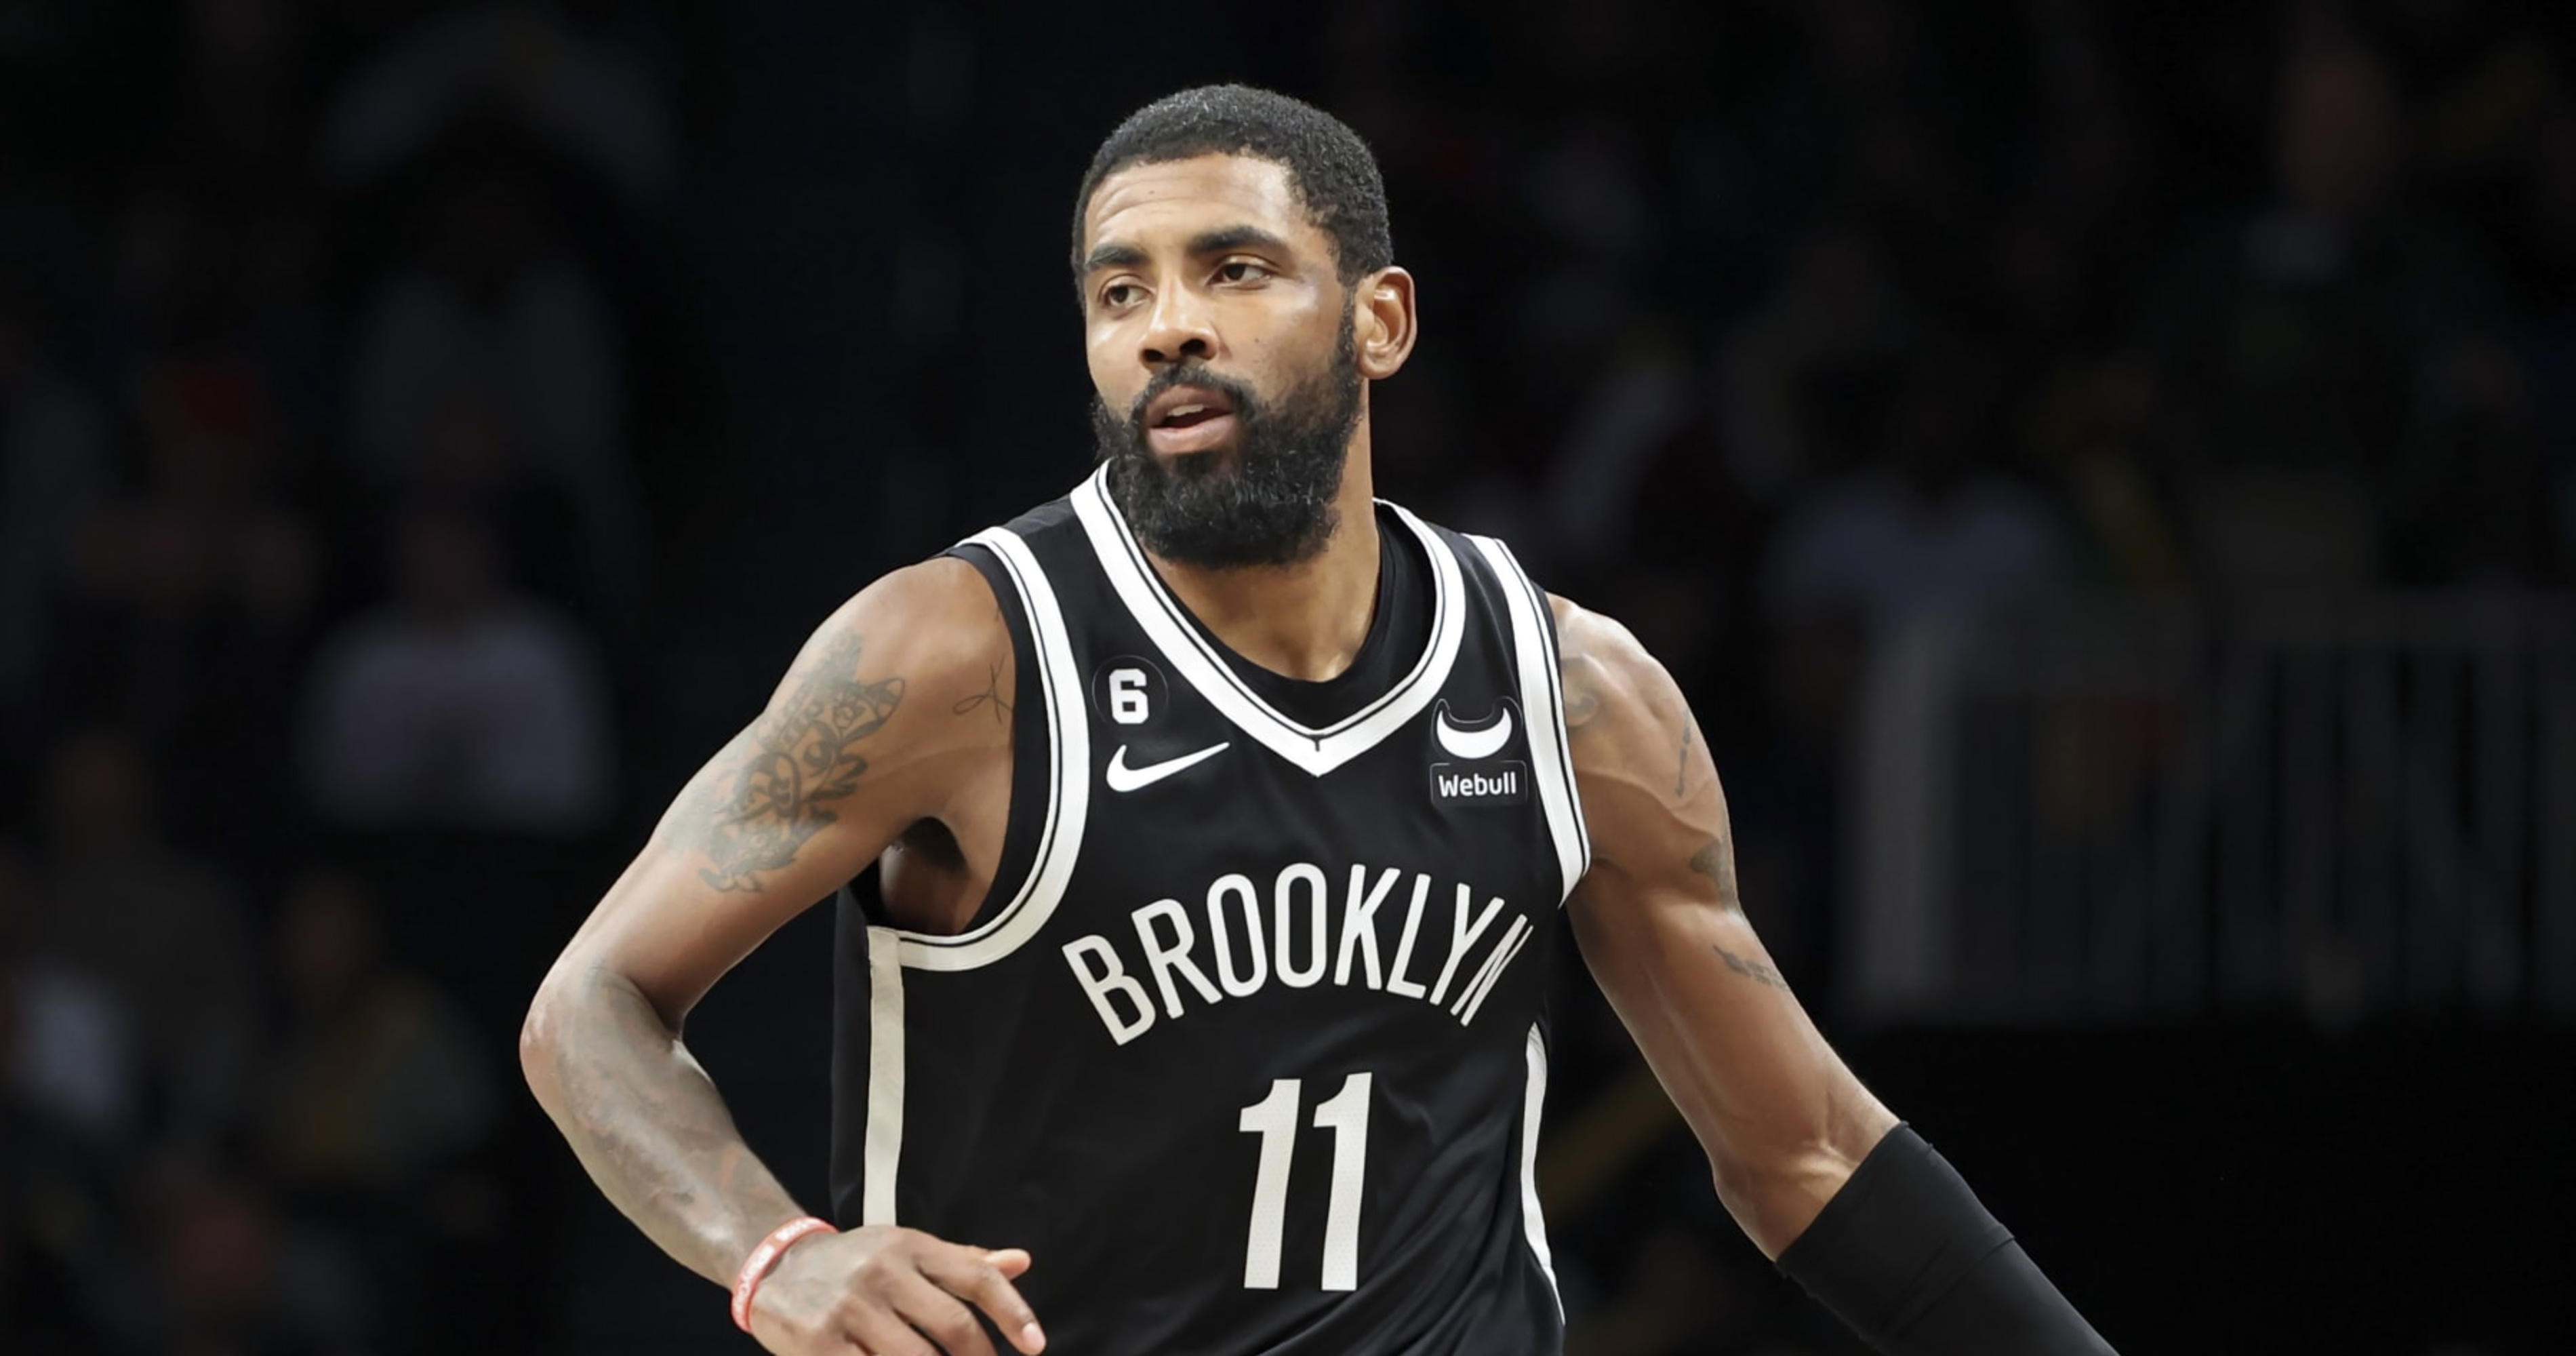 Report: Nets' Kyrie Irving Expected to Play vs. Grizzlies After 8-Game Suspensio..